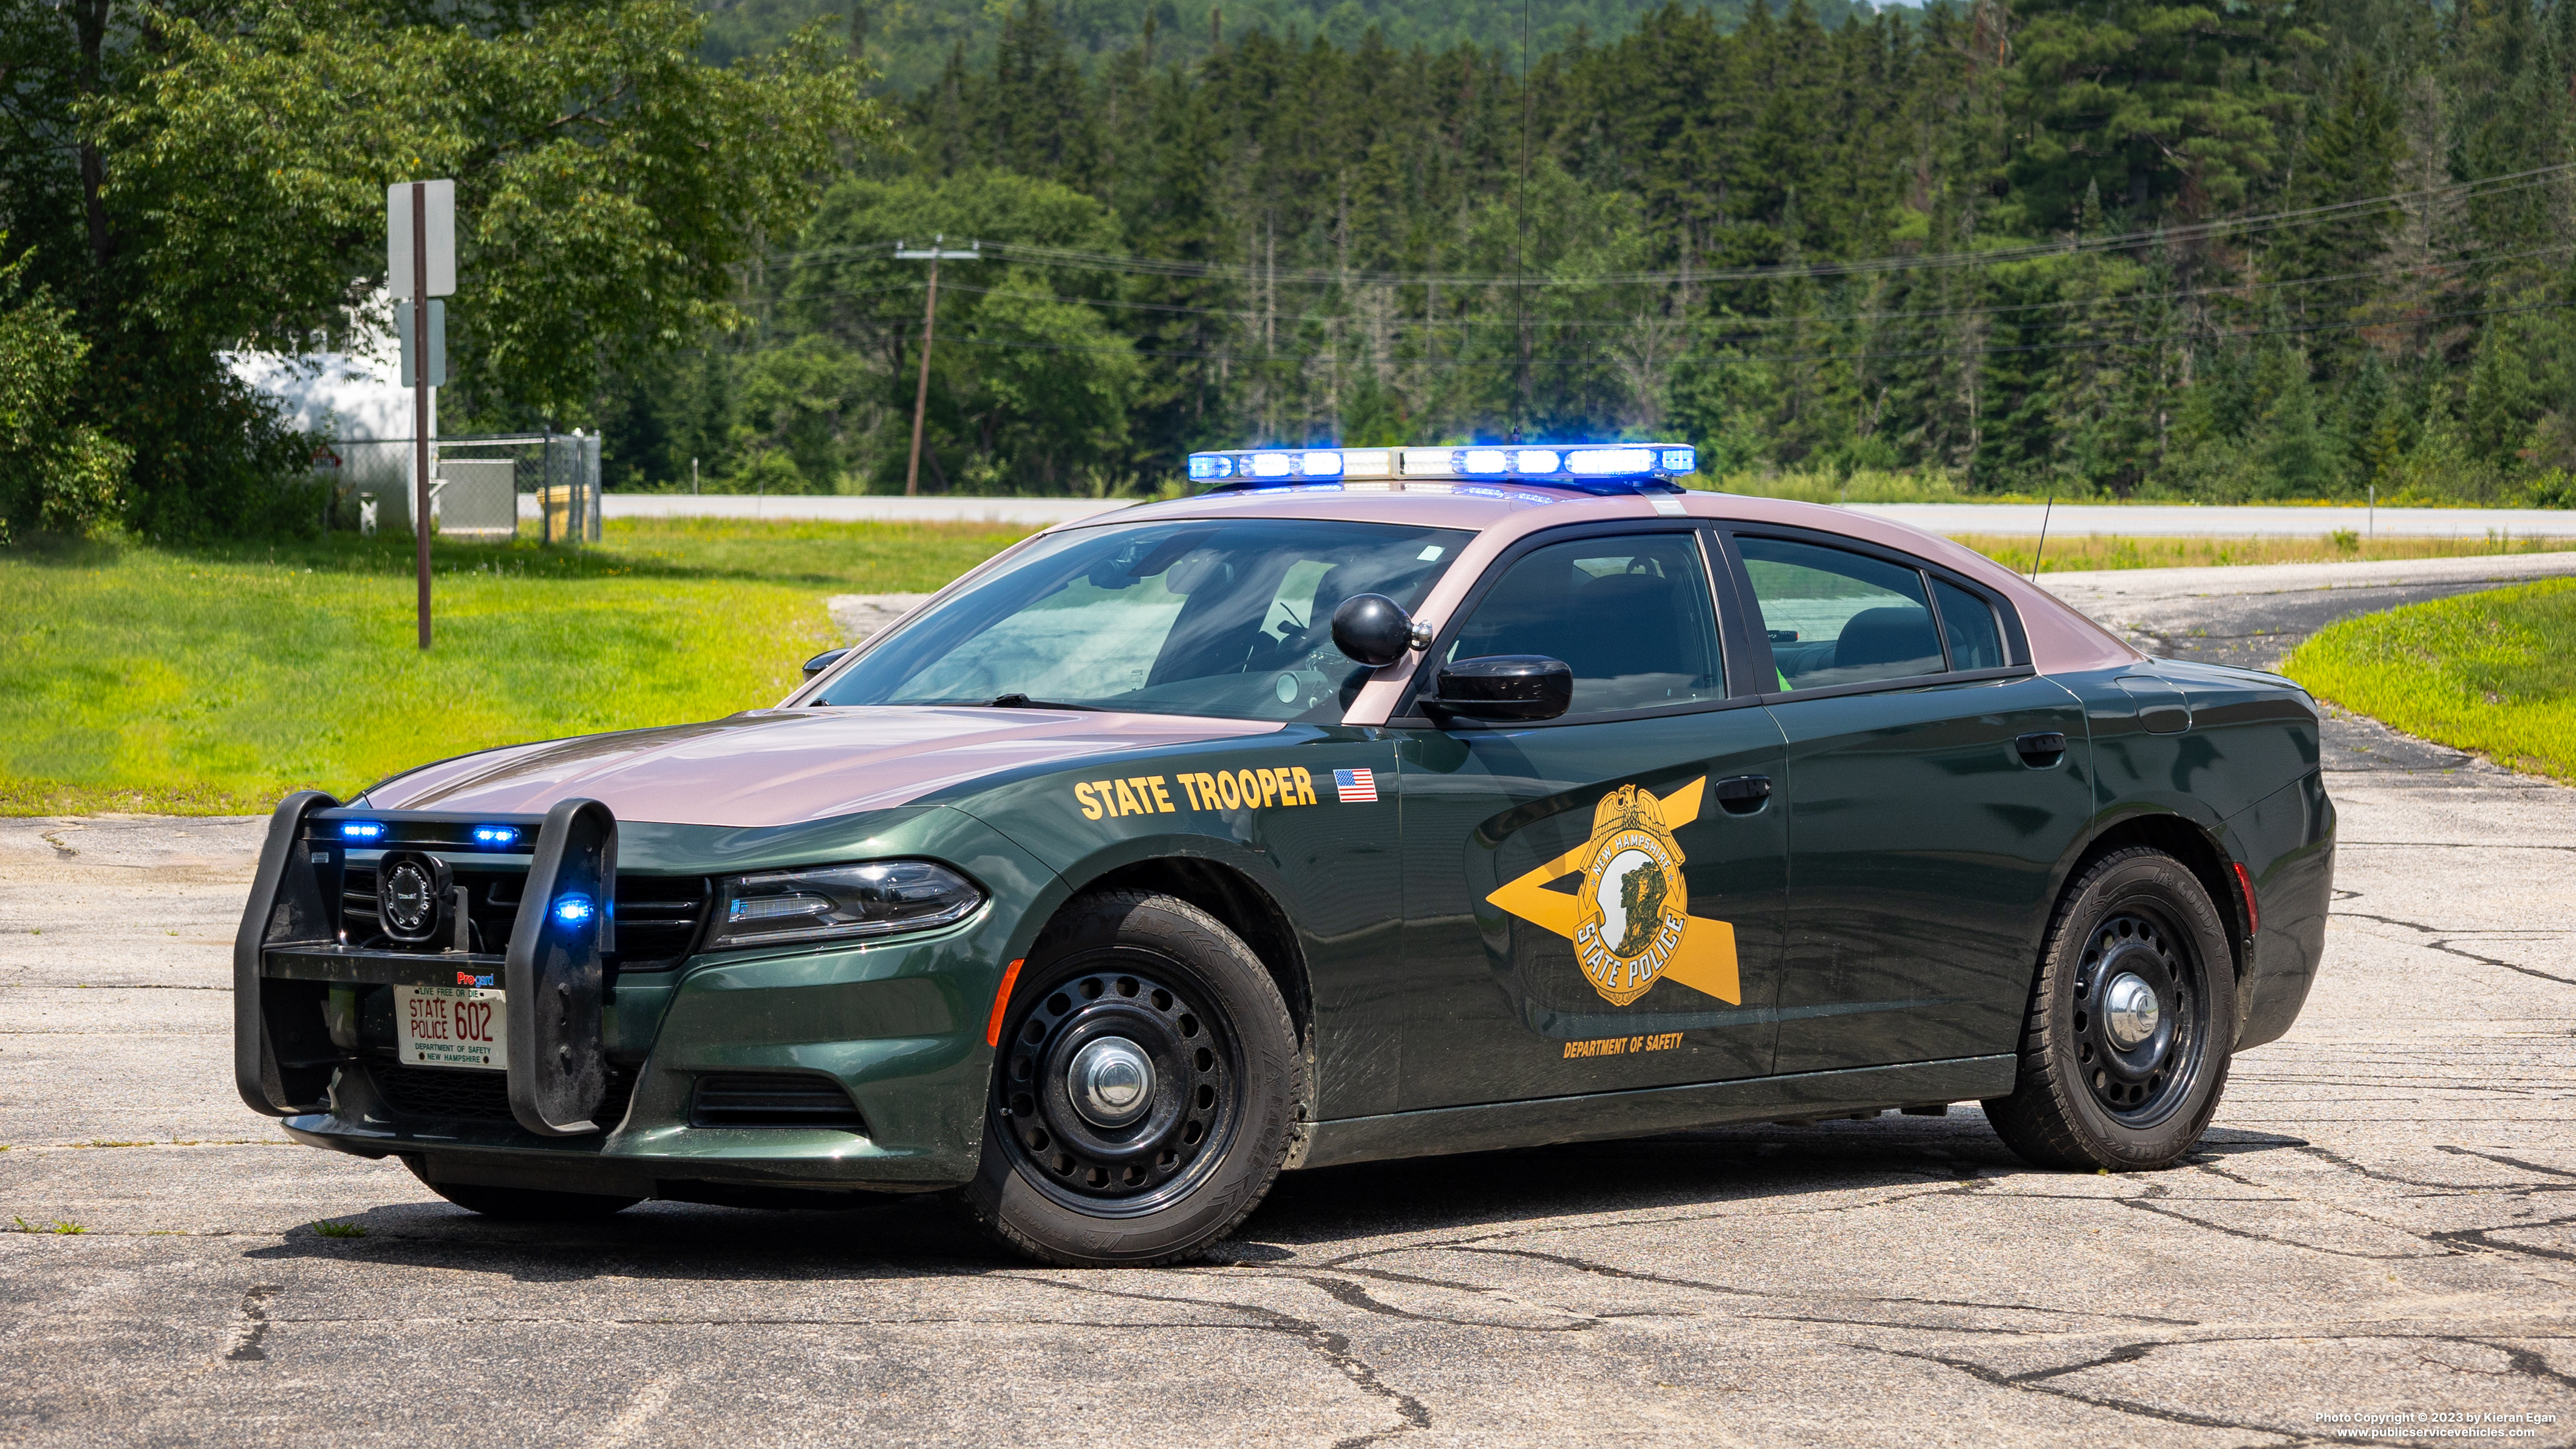 A photo  of New Hampshire State Police
            Cruiser 602, a 2020 Dodge Charger             taken by Kieran Egan